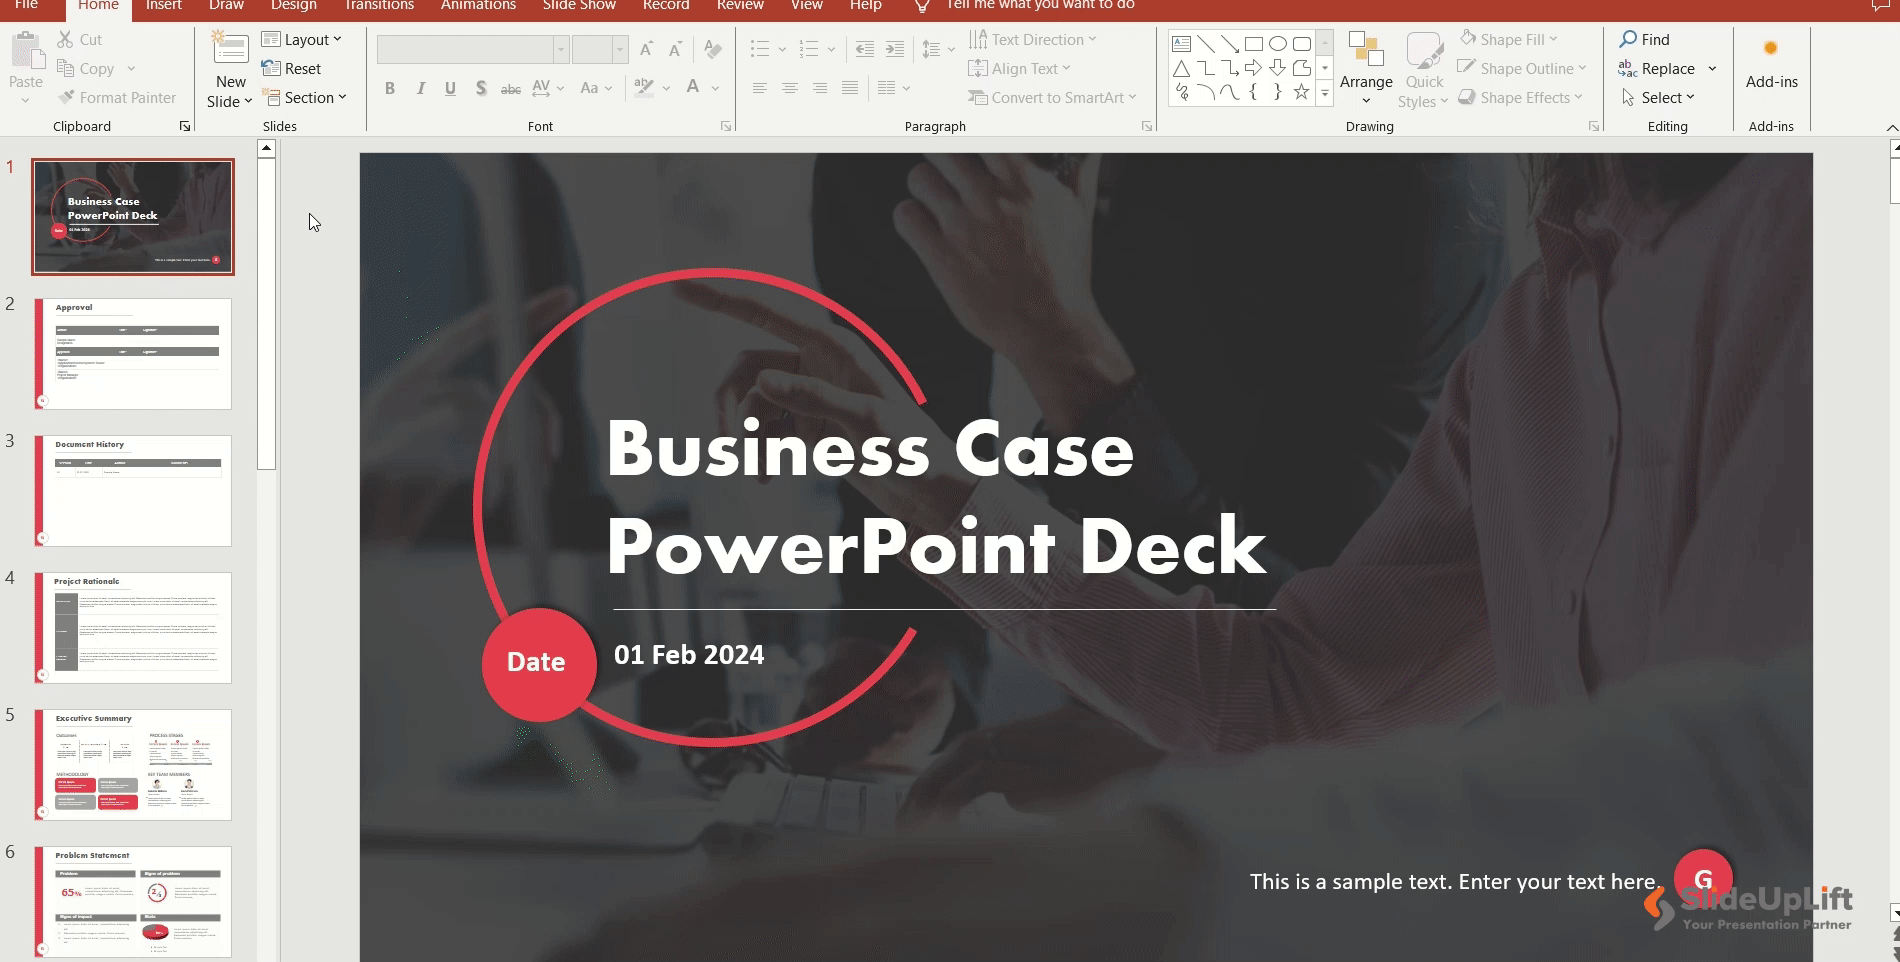 Shows Method 1 To Save Powerpoint Slide as Image In Windows